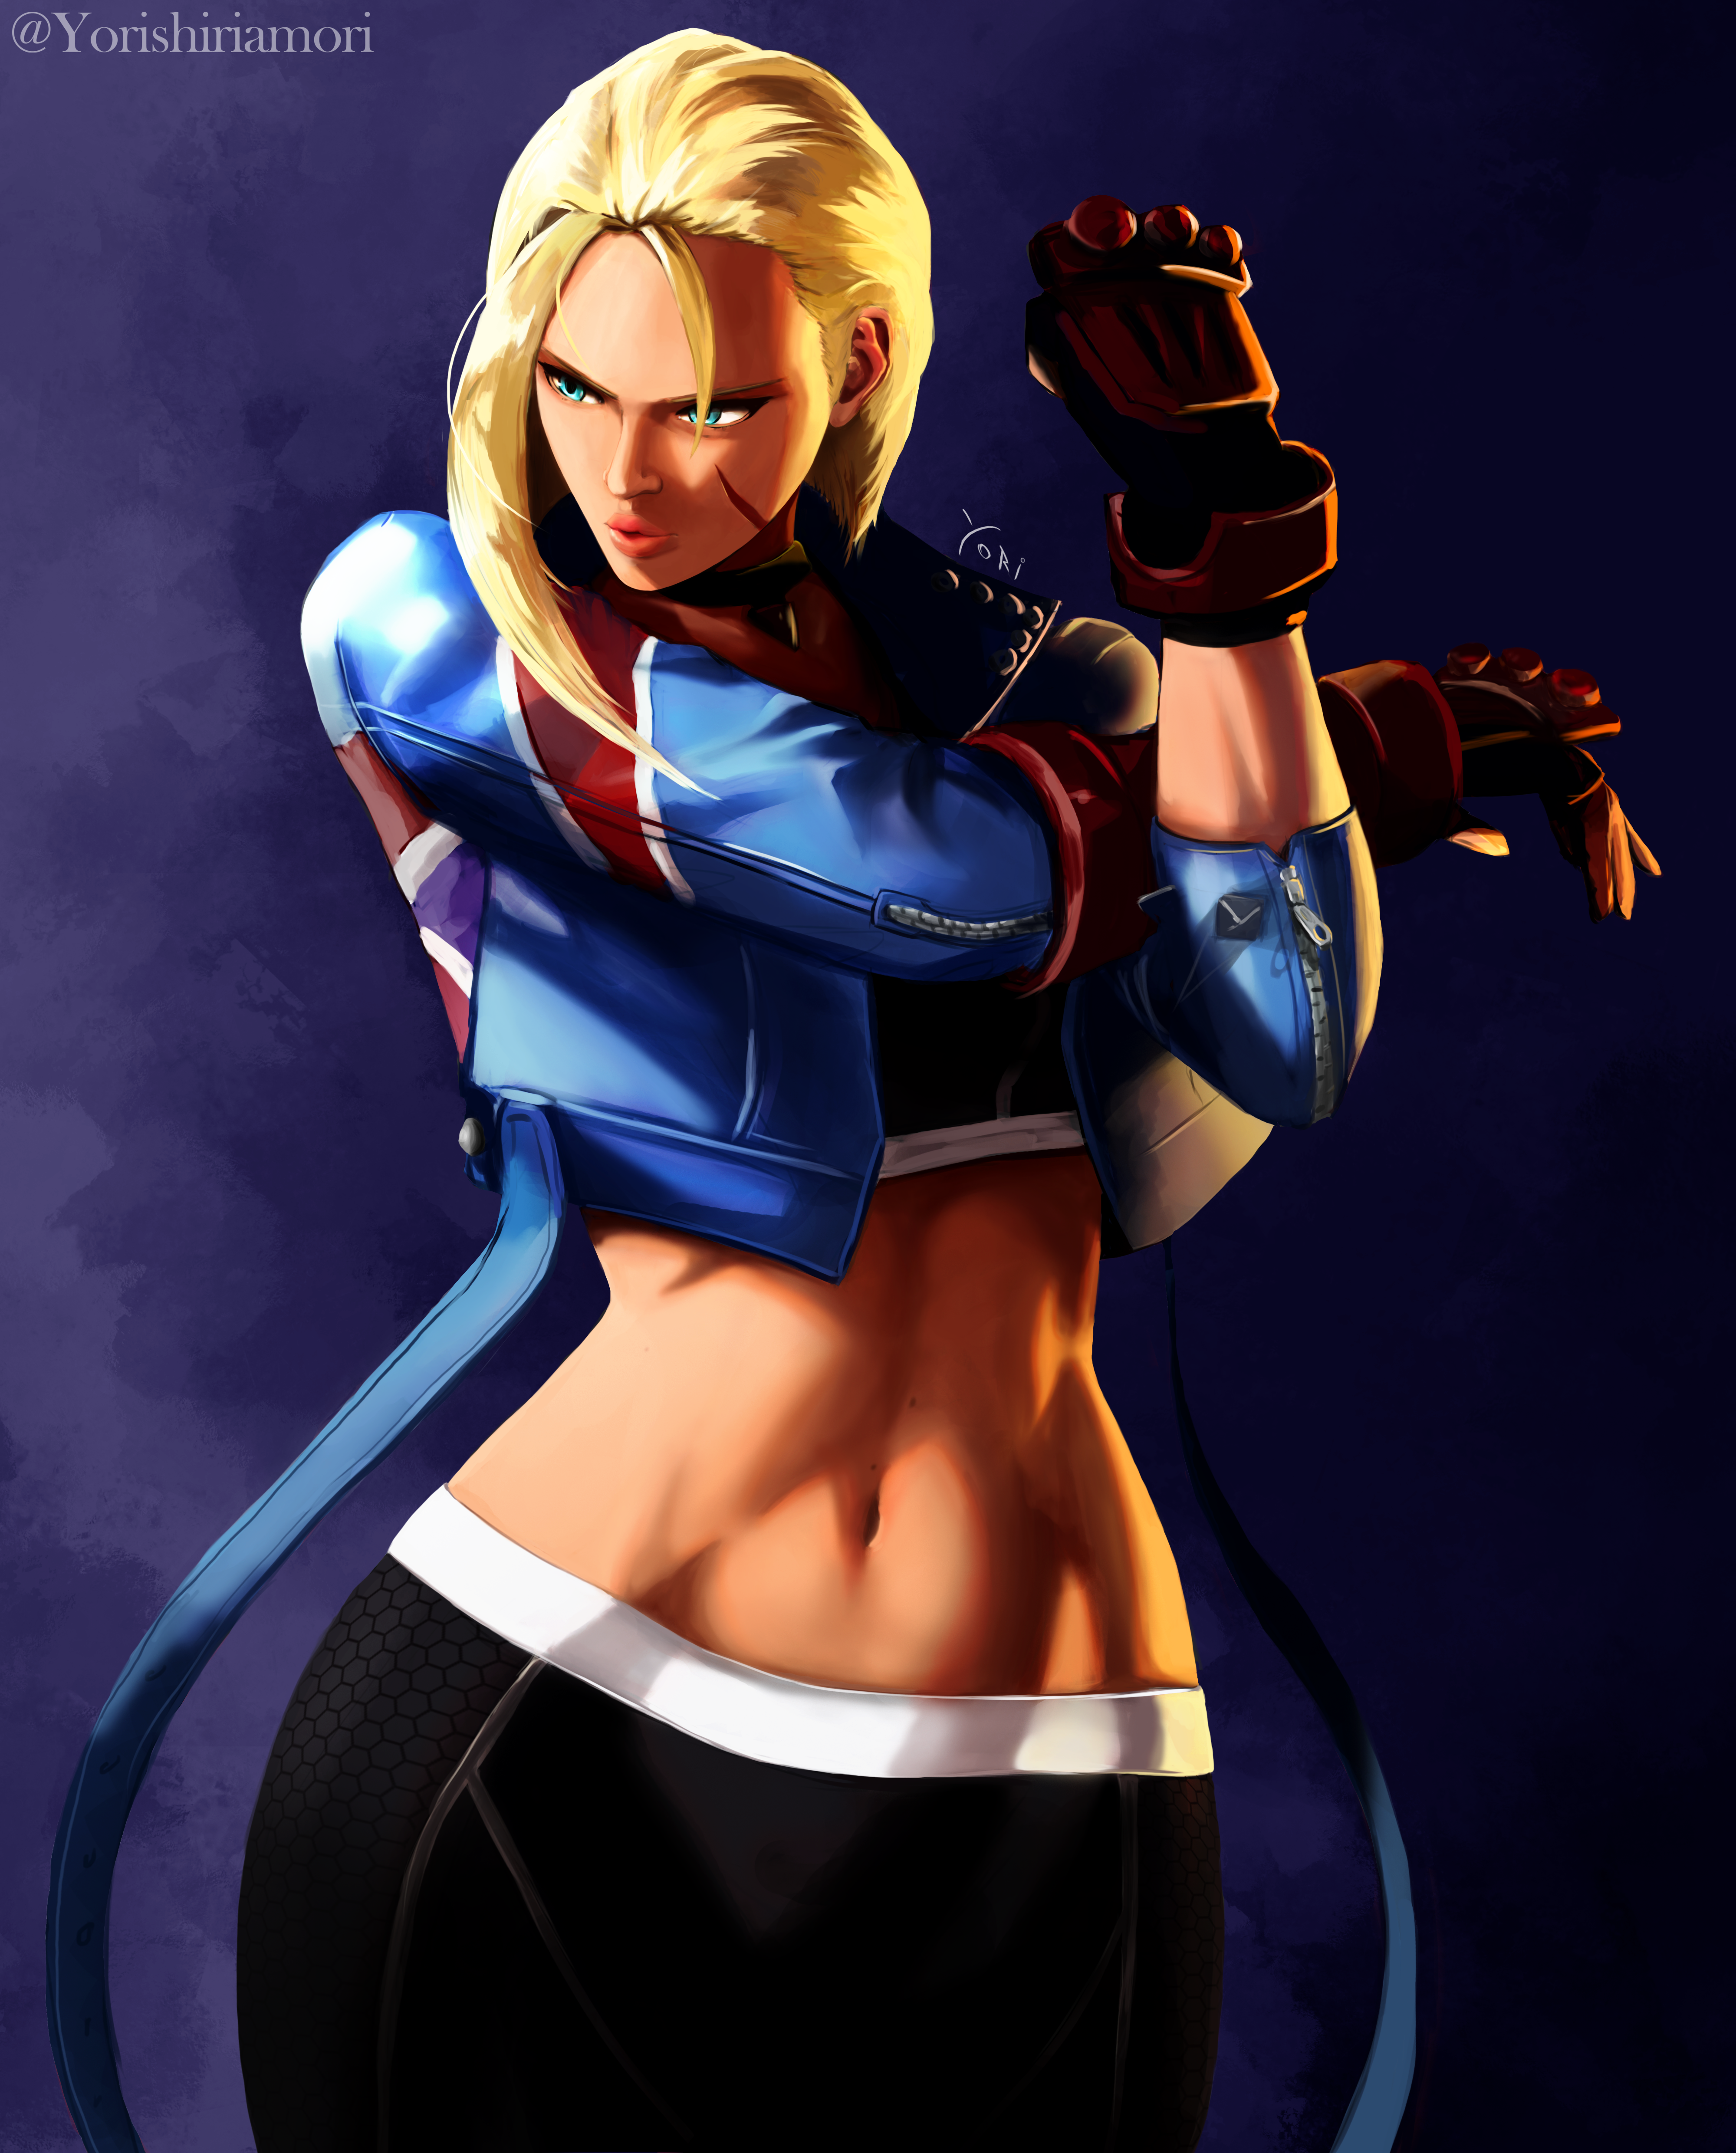 Cammy from Street fighter 6, stretch pose by toughbabesofficial on  DeviantArt